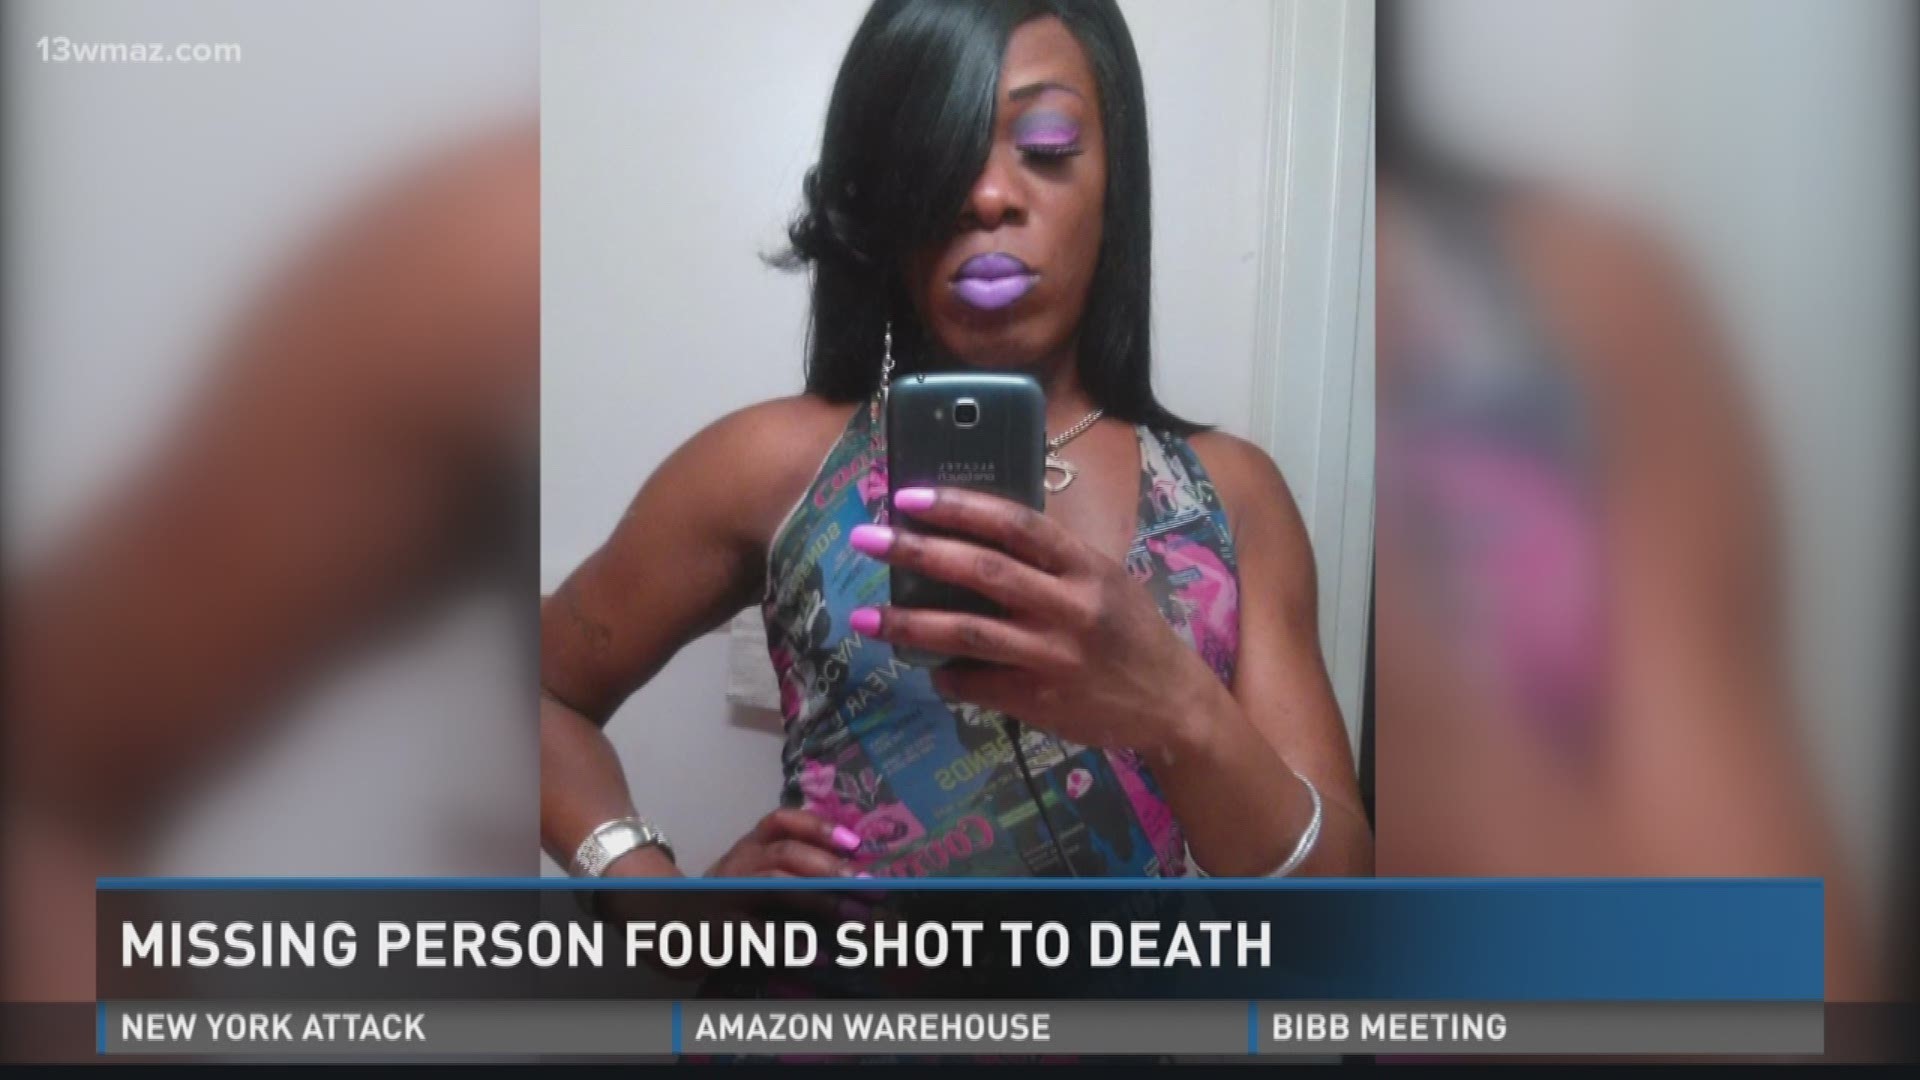 Missing person found shot to death